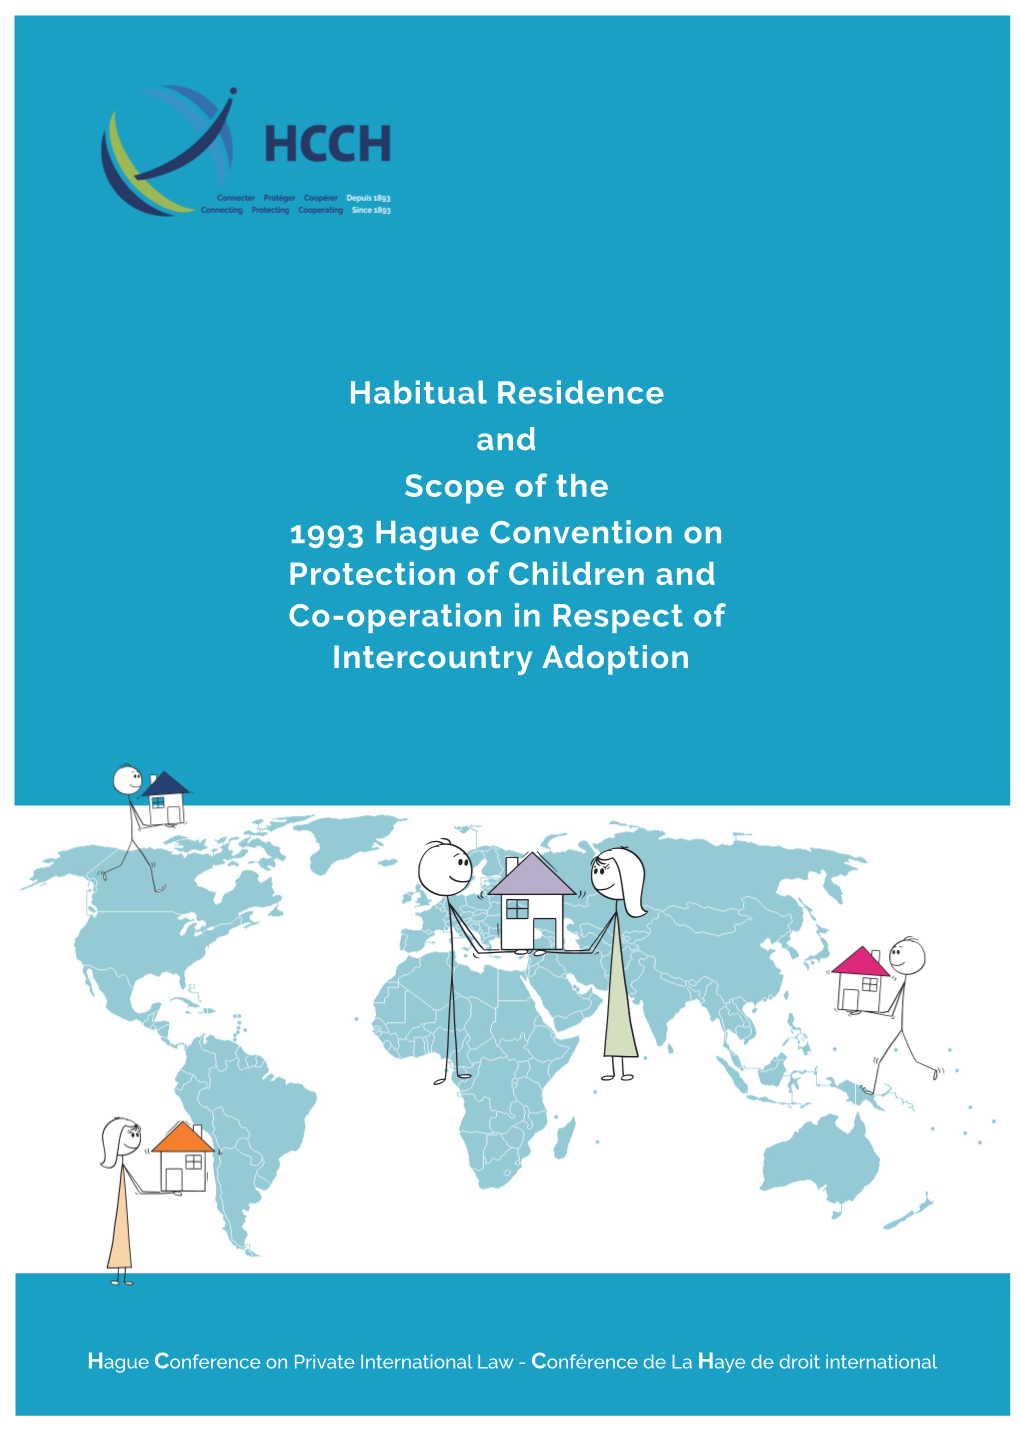 Note on Habitual Residence and the Scope of the 1993 Hague Convention on Protection of Children and Co-Operation in Respect of Intercountry Adoption